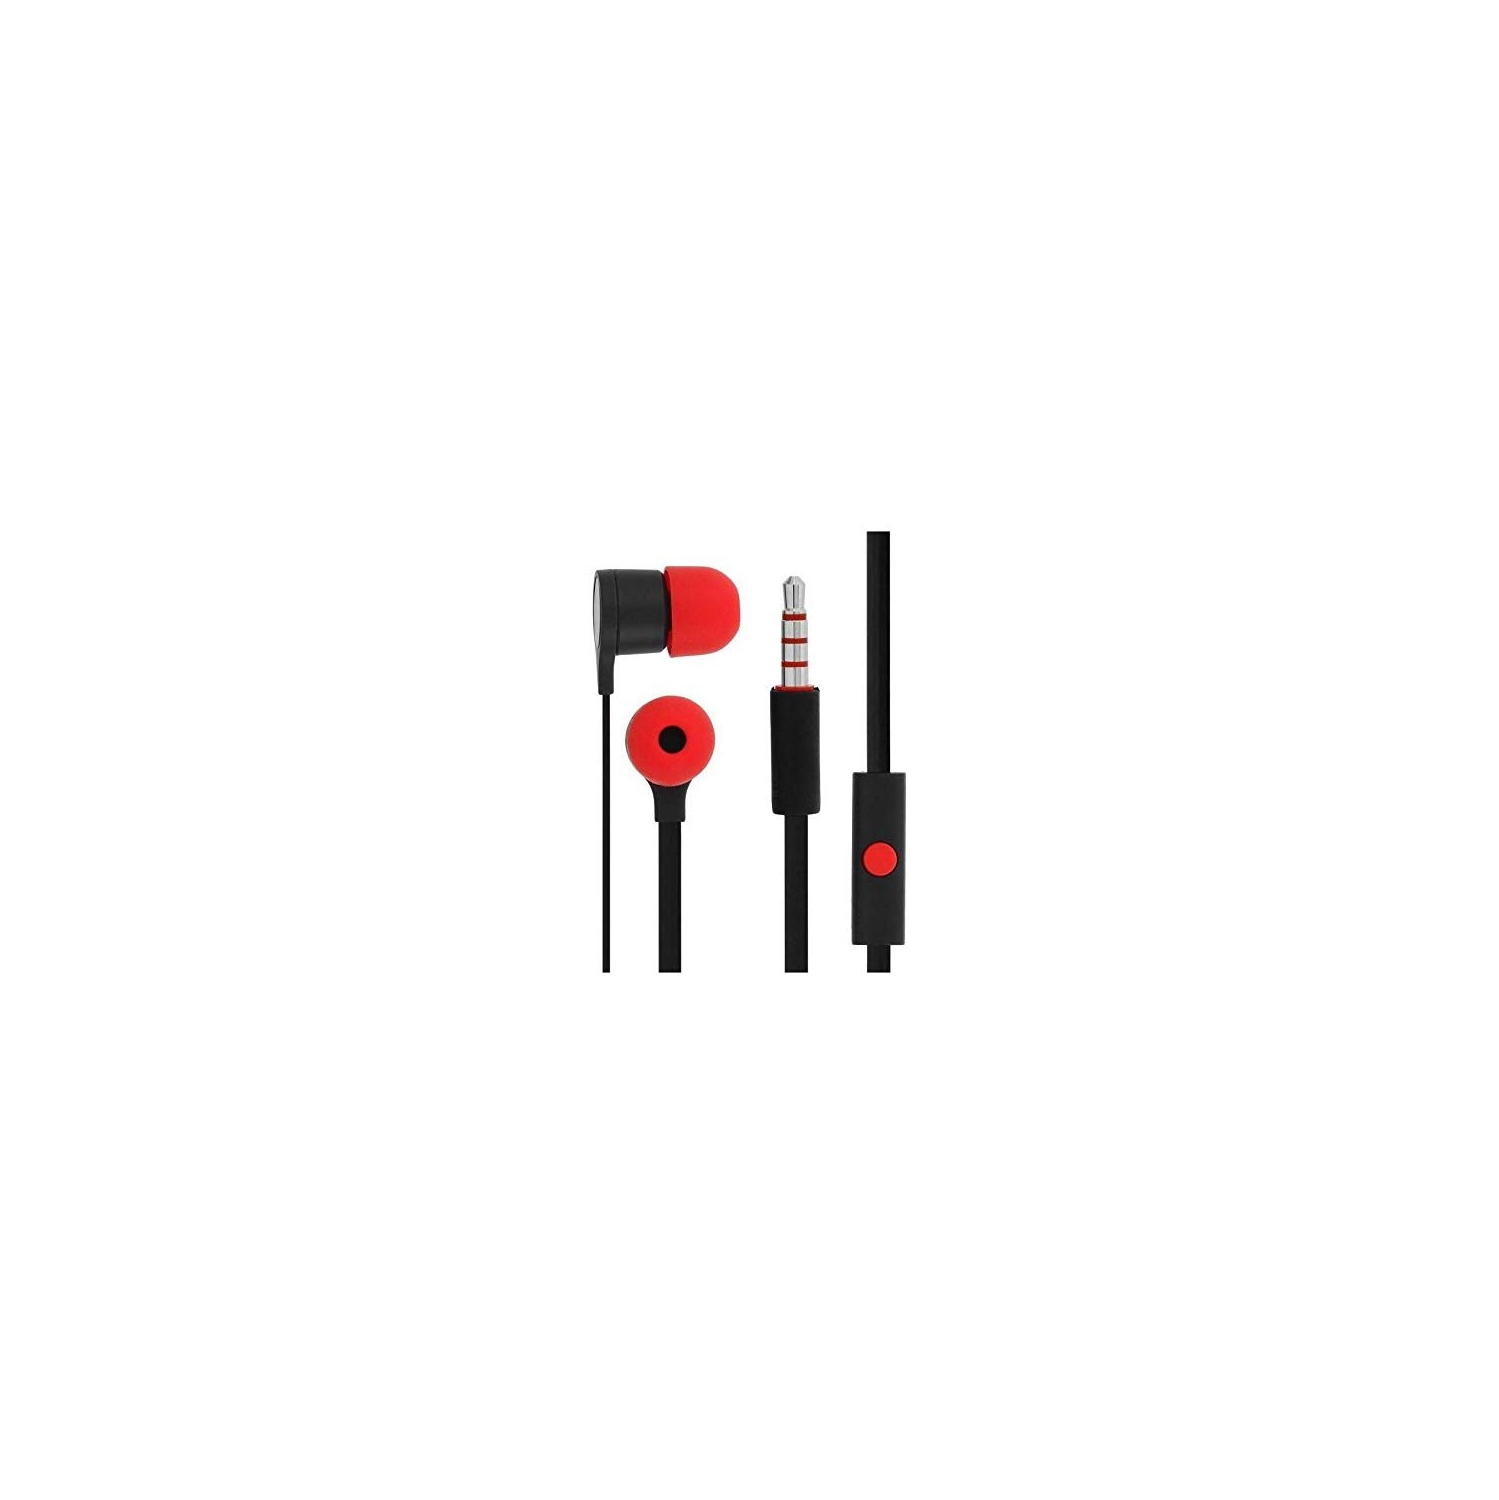 HTC Headset Headphone For HTC One HTC Butterfly HTC 8X 8S MAX300 T528 X920E 802W 802D ONE M7 BLACK RED 3.5mm Stereo